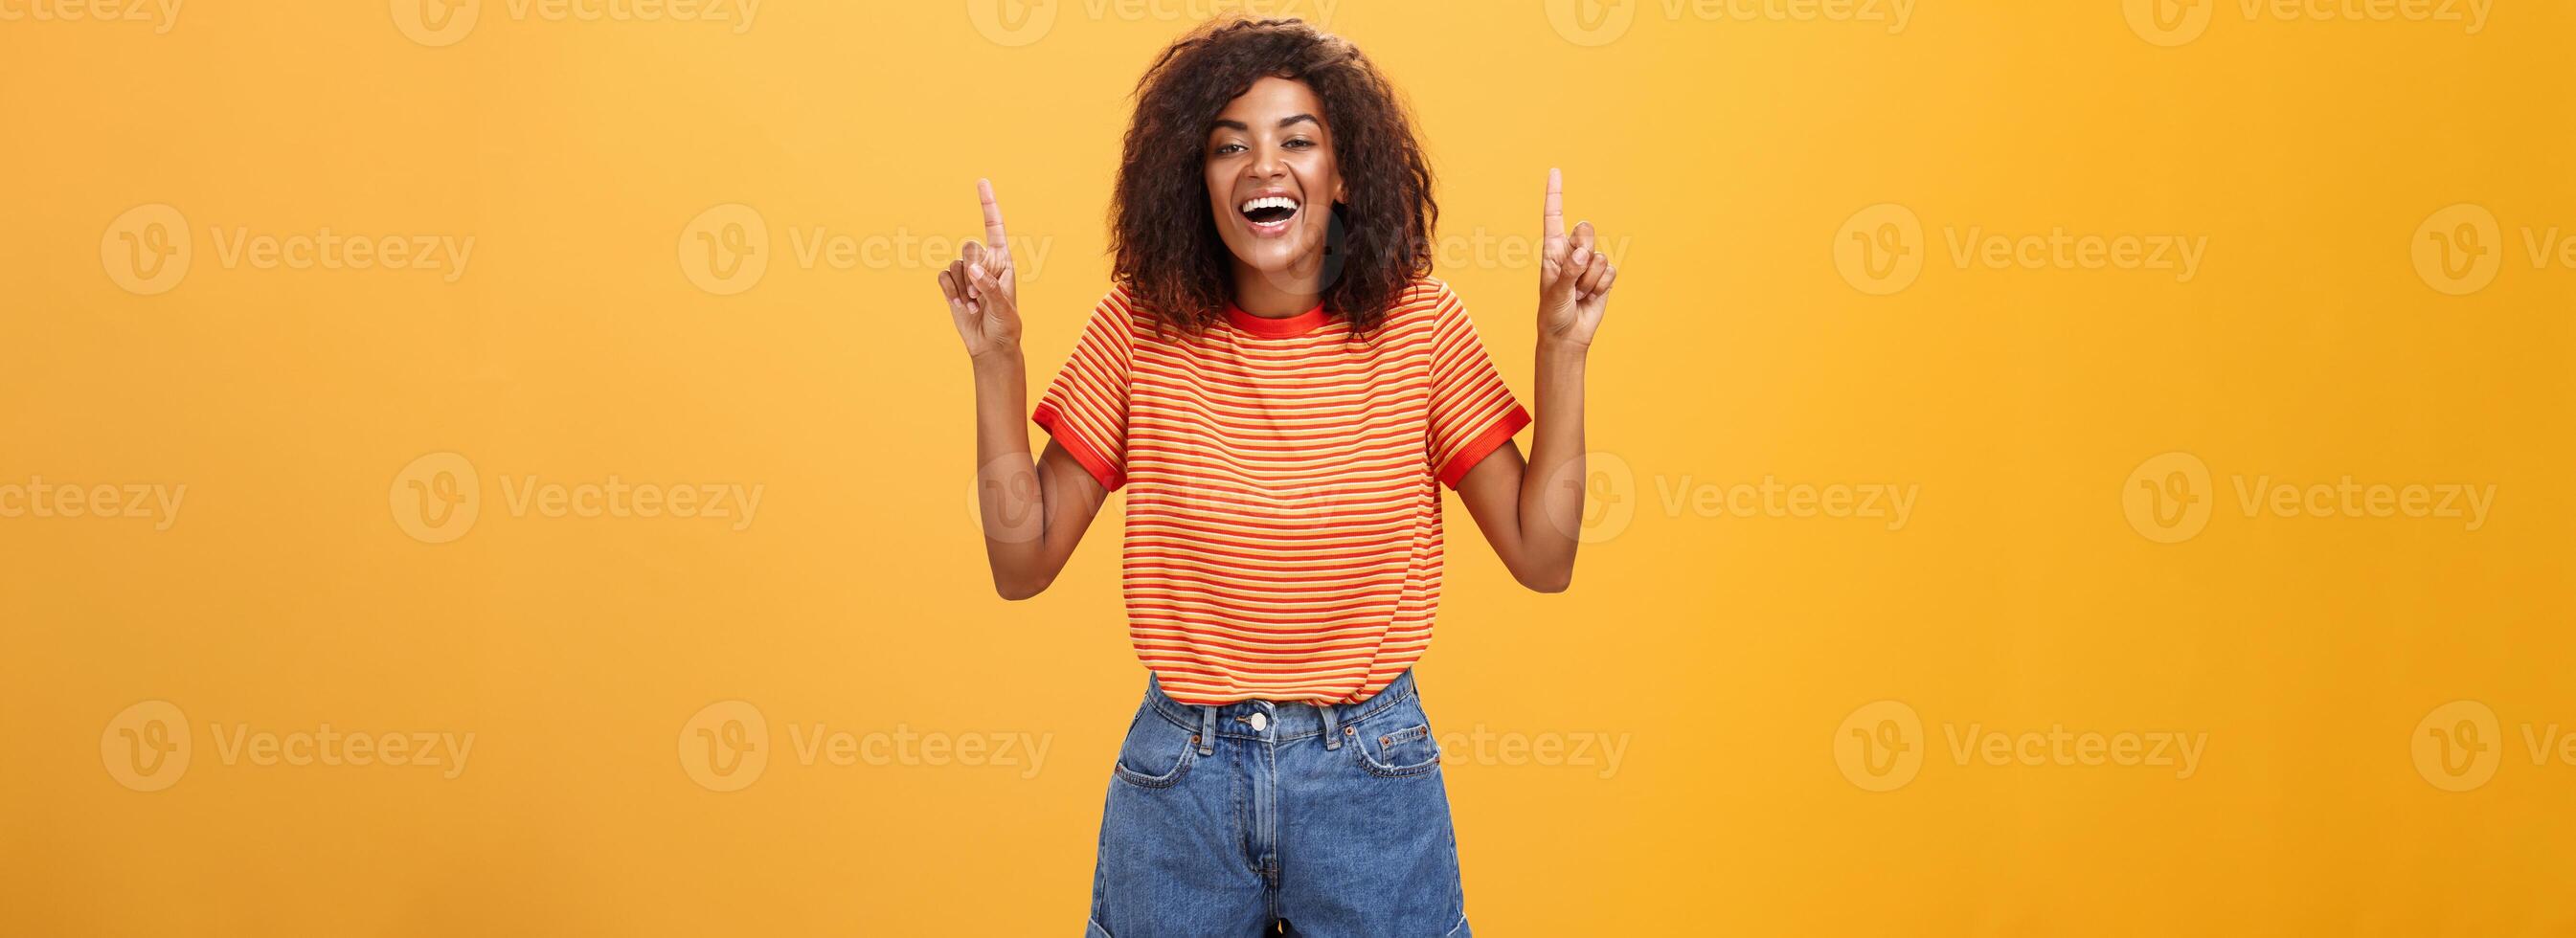 Woman feeling amused and entertained. Portrait of happy carefree stylish African-American girl with afro hairstyle laughing out loud joyfully pointing up with raised arms over orange wall photo